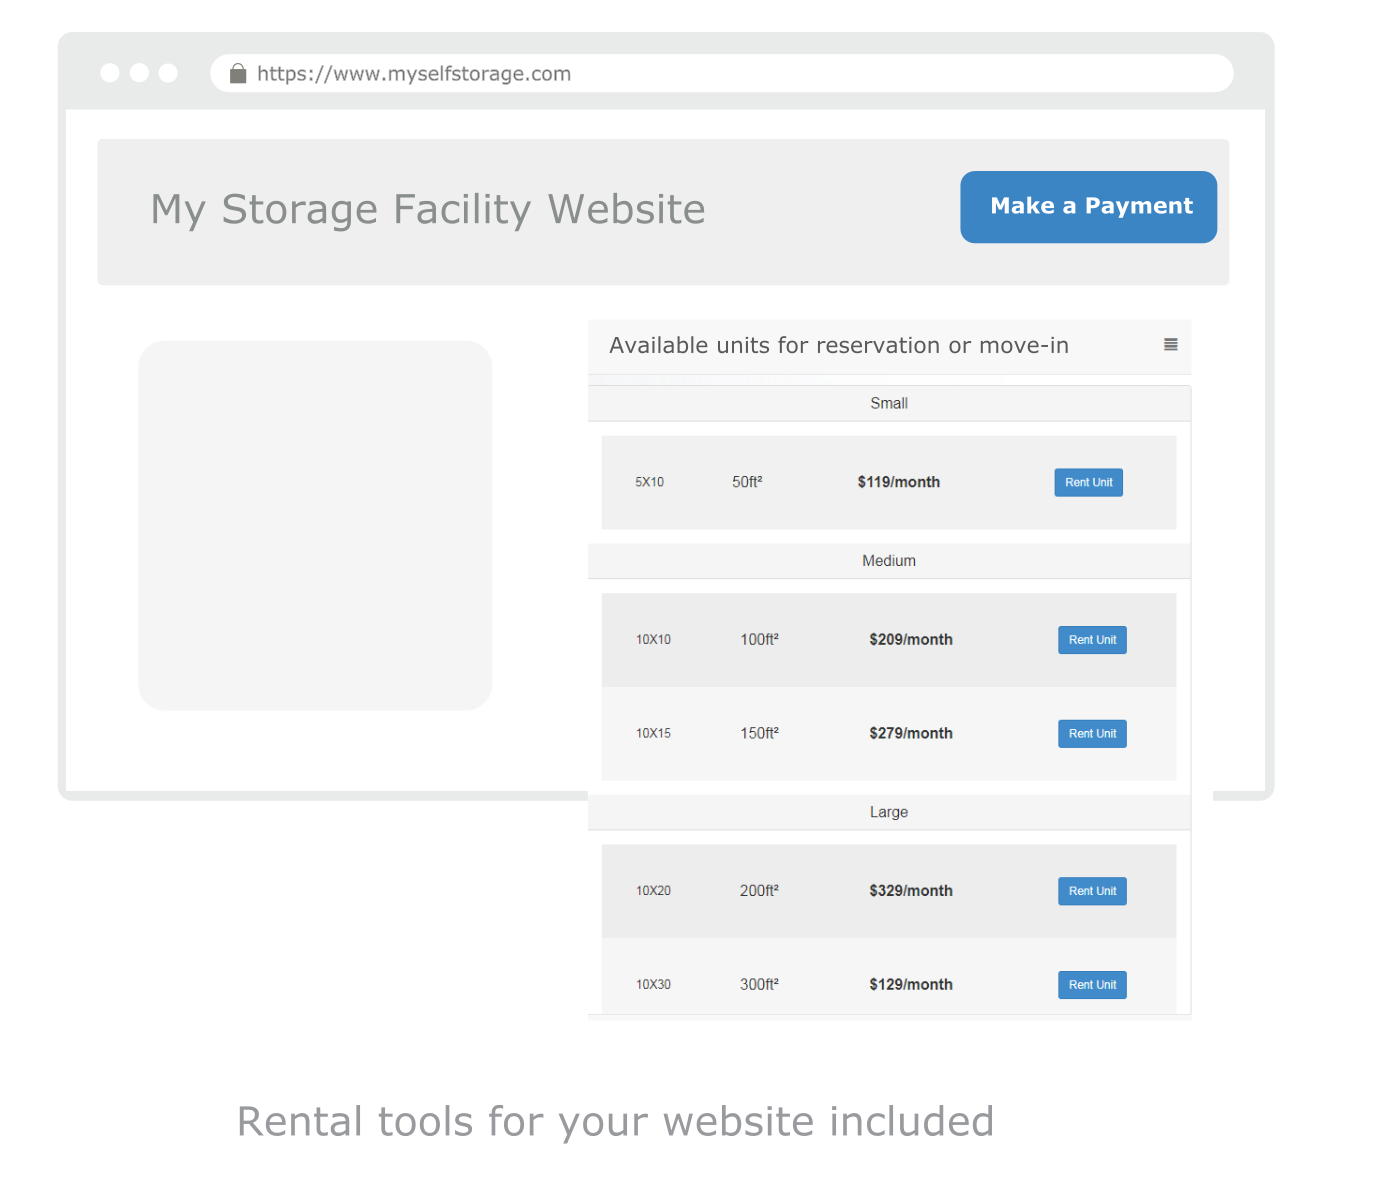 Easily build in rental tools directly onto your facility website without any website designing knowledge. Allow tenants to make payments, reserve units, or move into units.